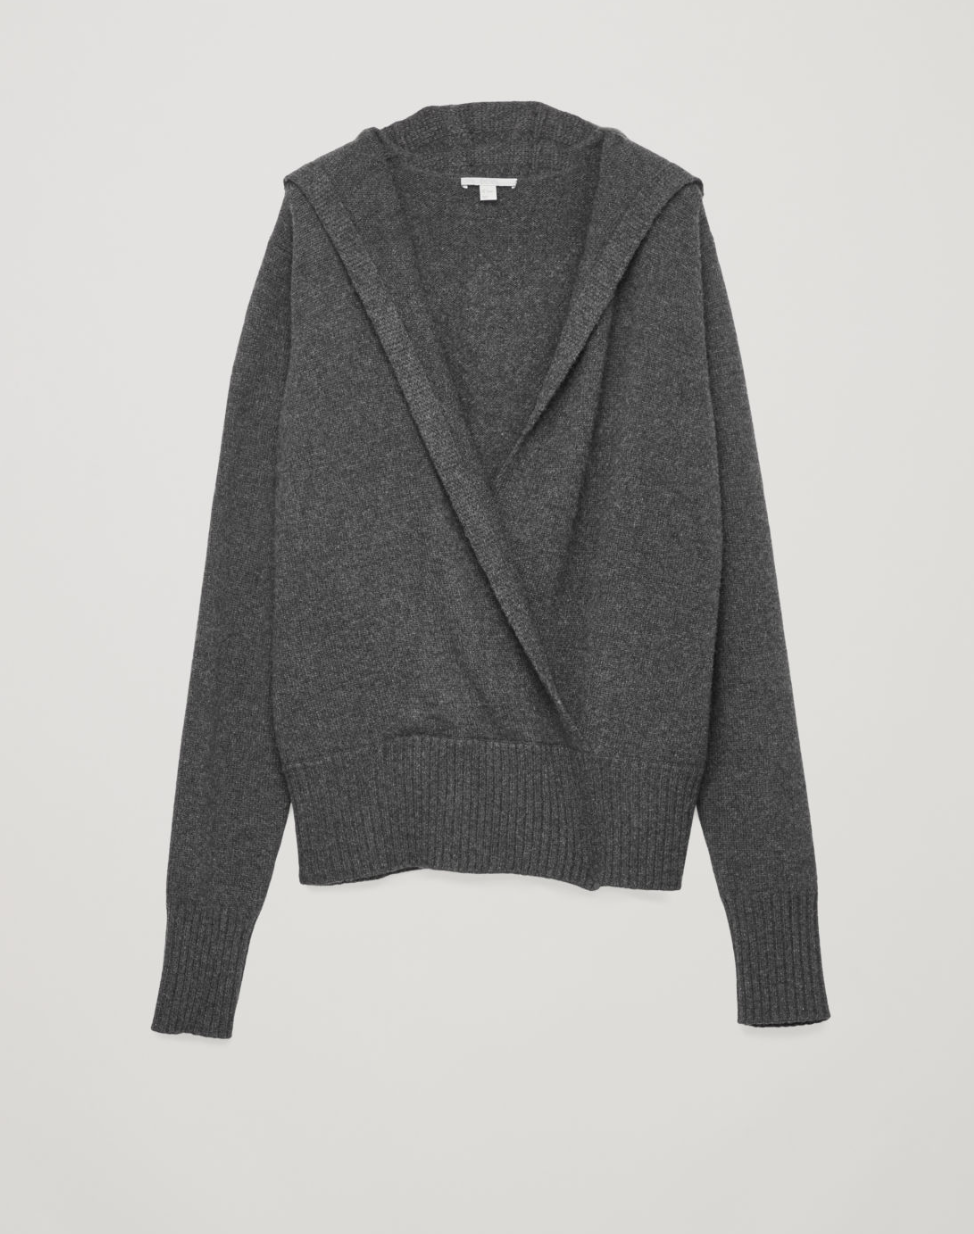 COS Cashmere Hoodie